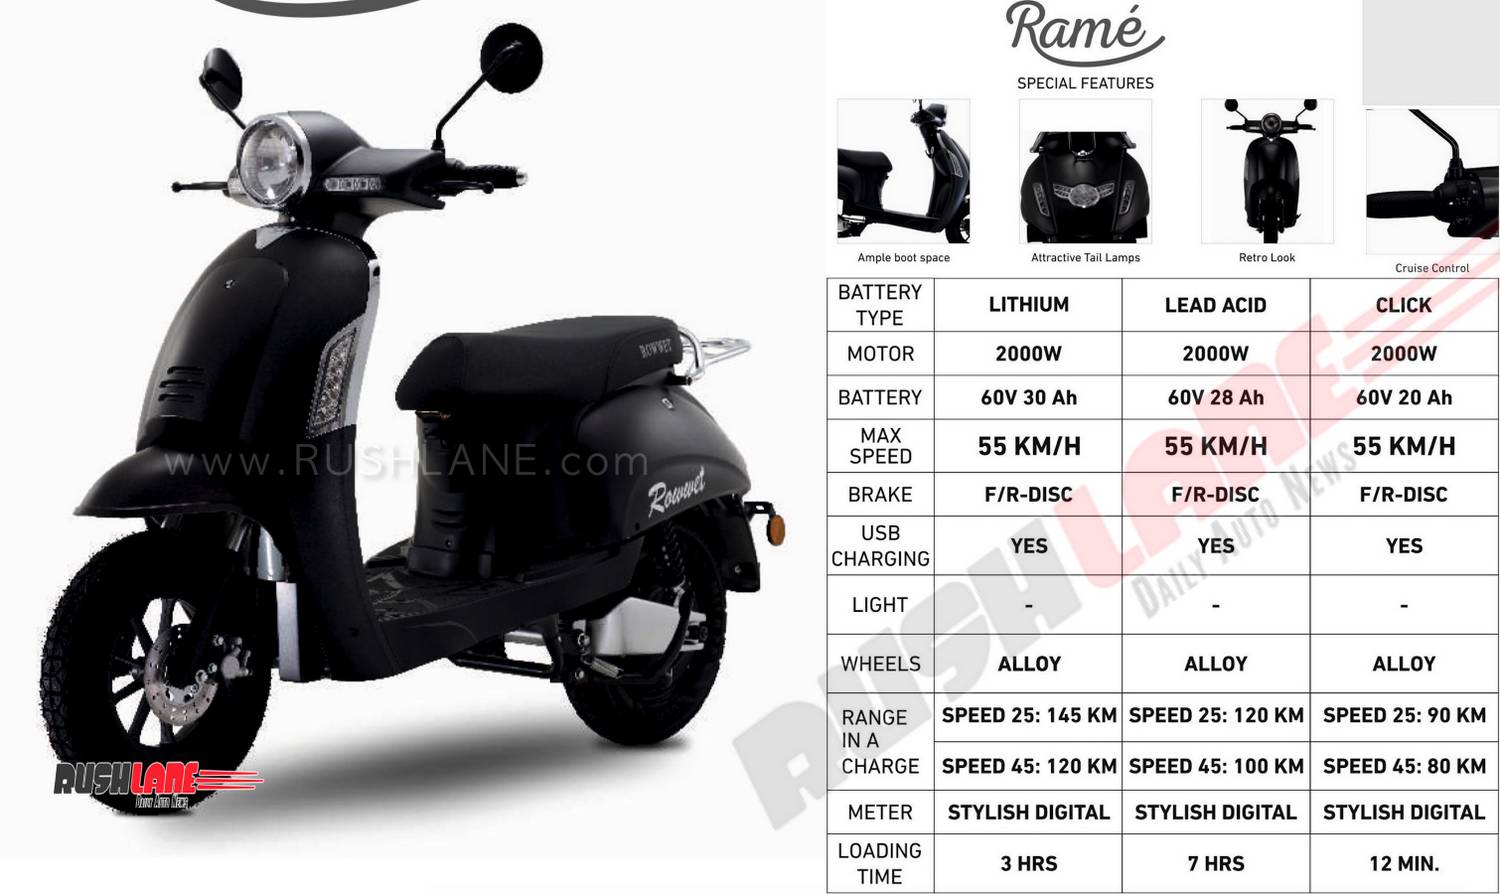 Rowwet Rame electric scooter